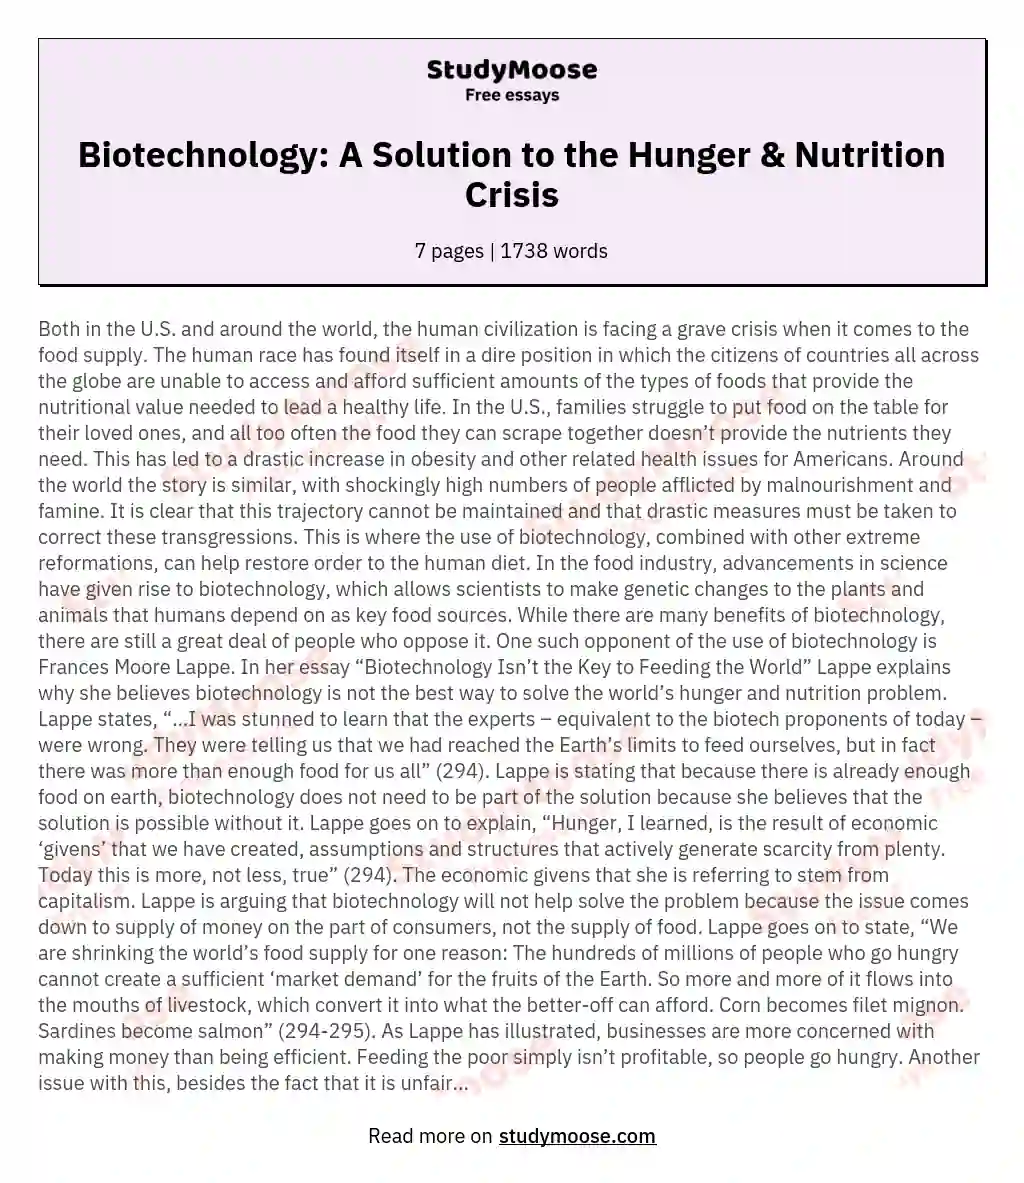 Biotechnology: A Solution to the Hunger & Nutrition Crisis essay